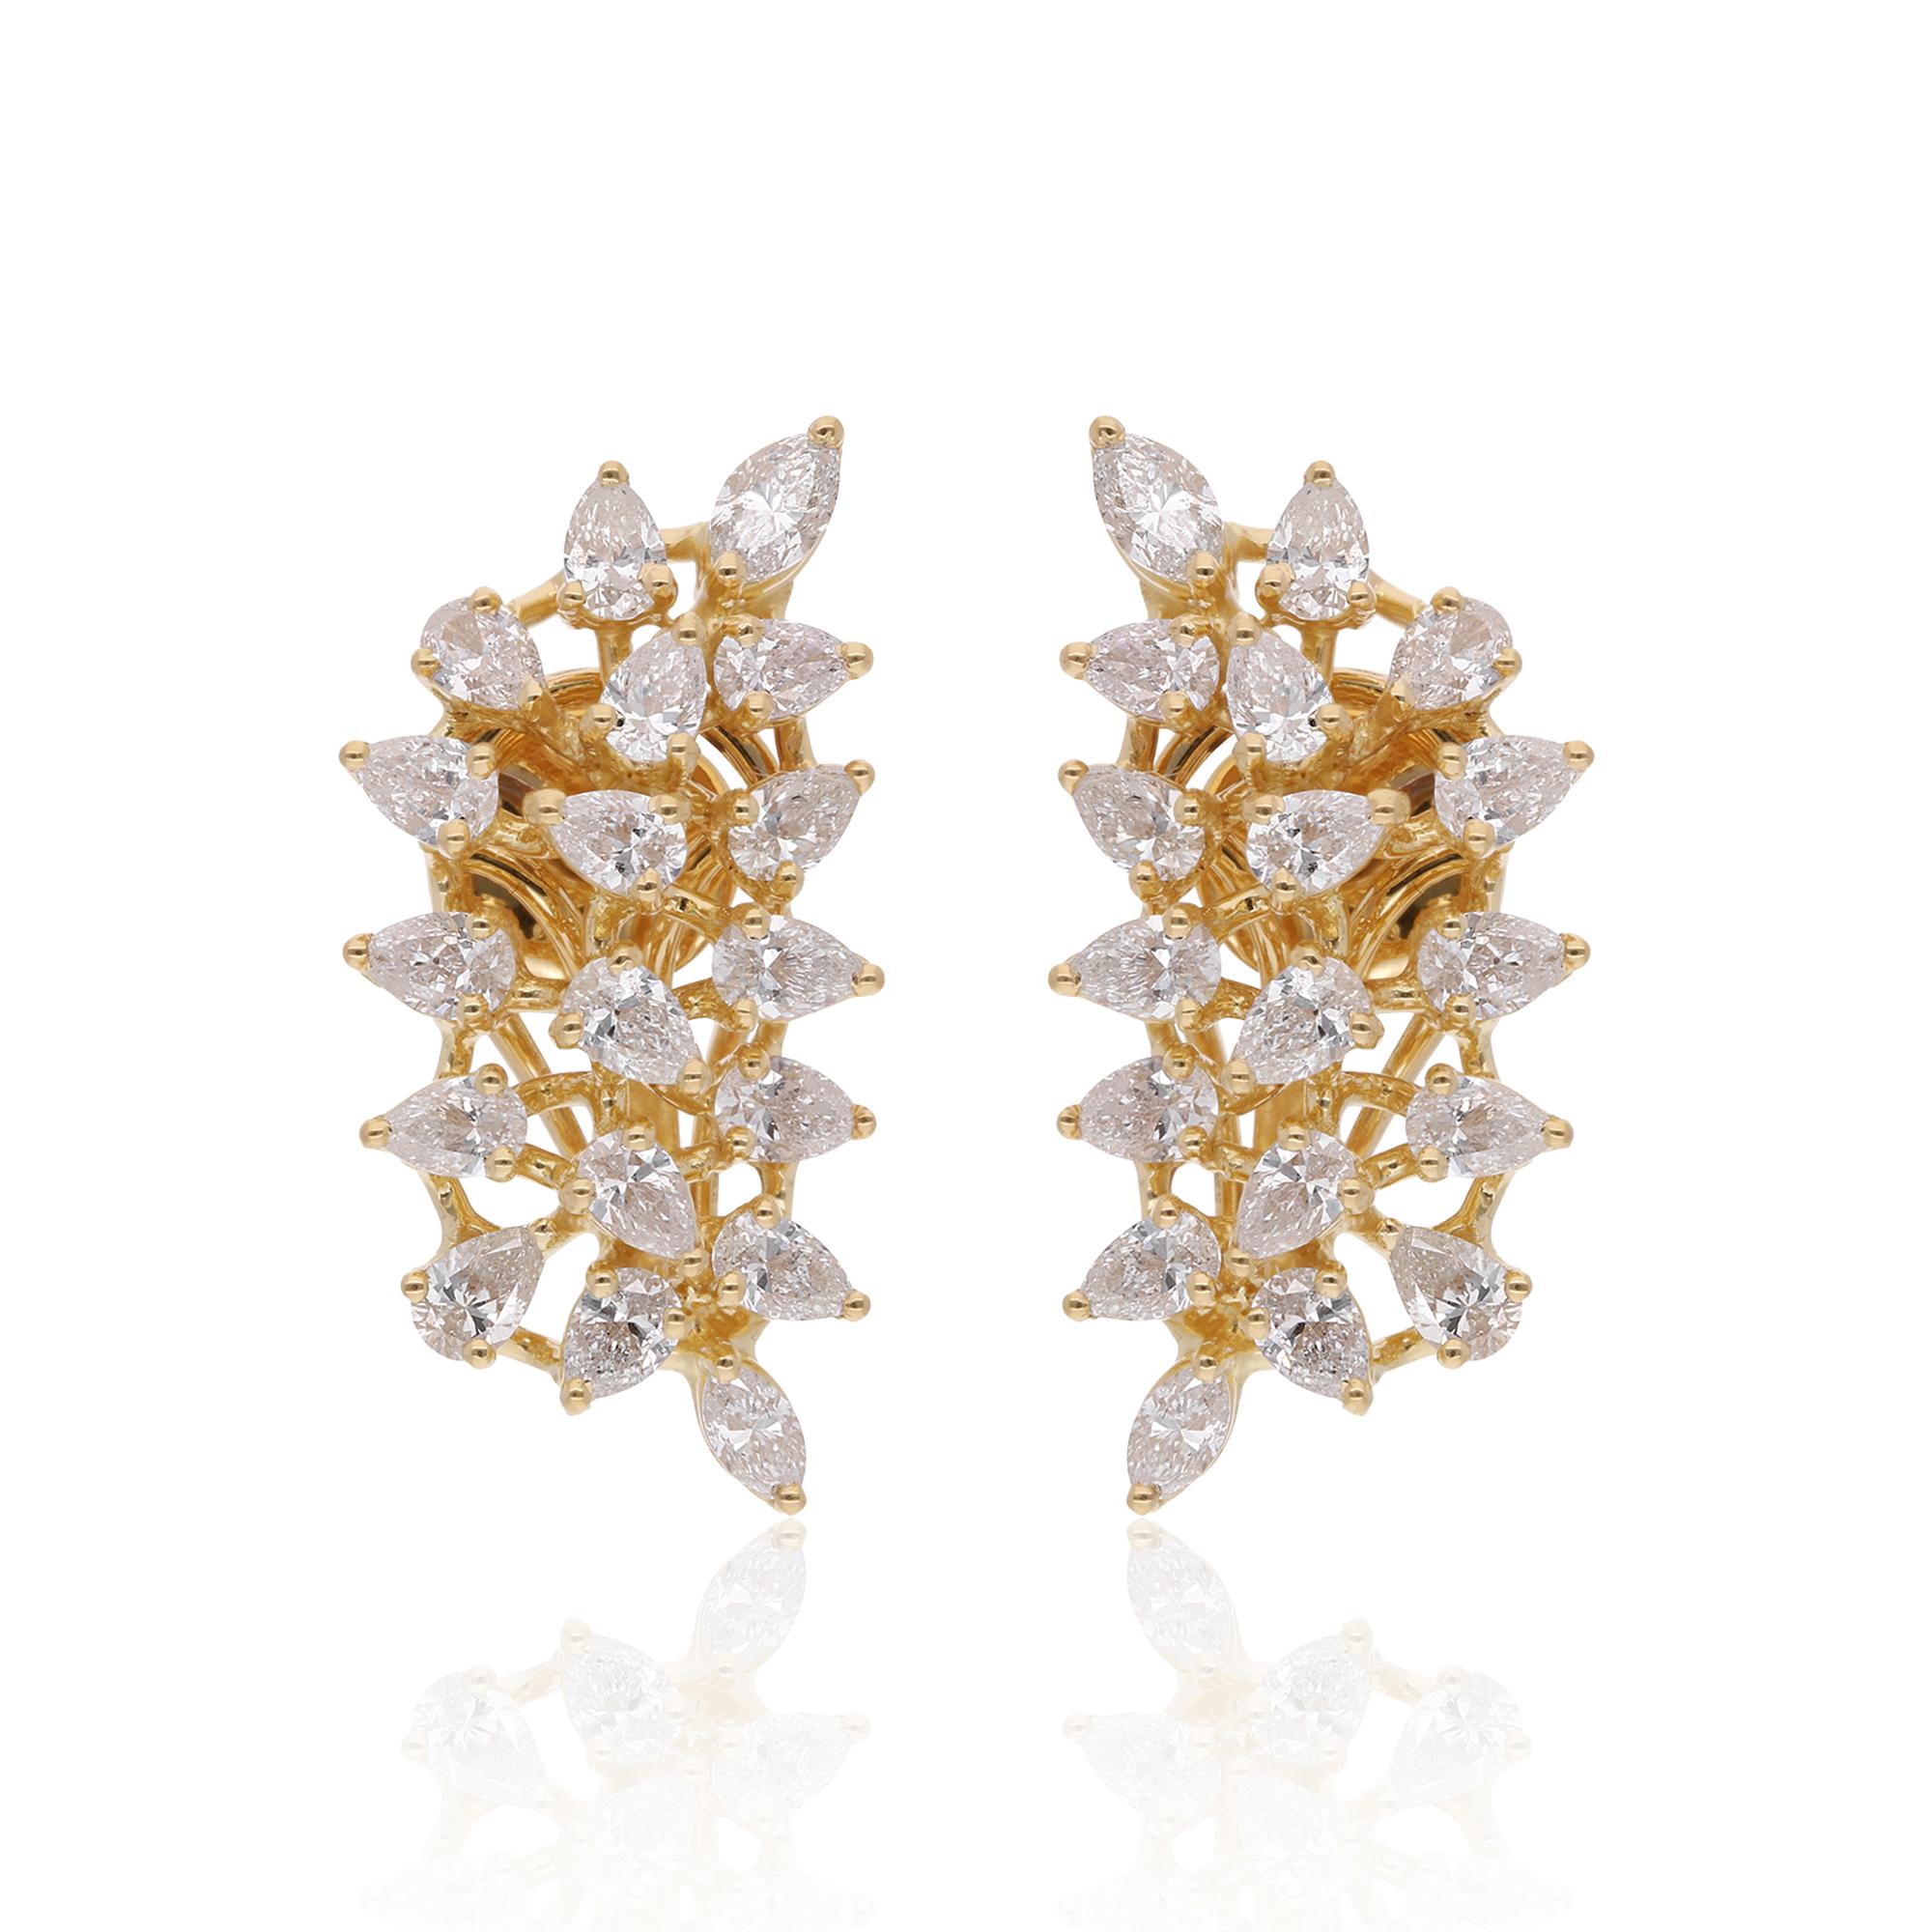 Life is stylish and beautiful when you have this 18k Yellow Gold Earrings which is indeed special. Wear your heart with the sparkling glory of Diamond that showcases a sharp youthful vibe. A finest pick to seal your love.

✧✧Welcome To Our Shop